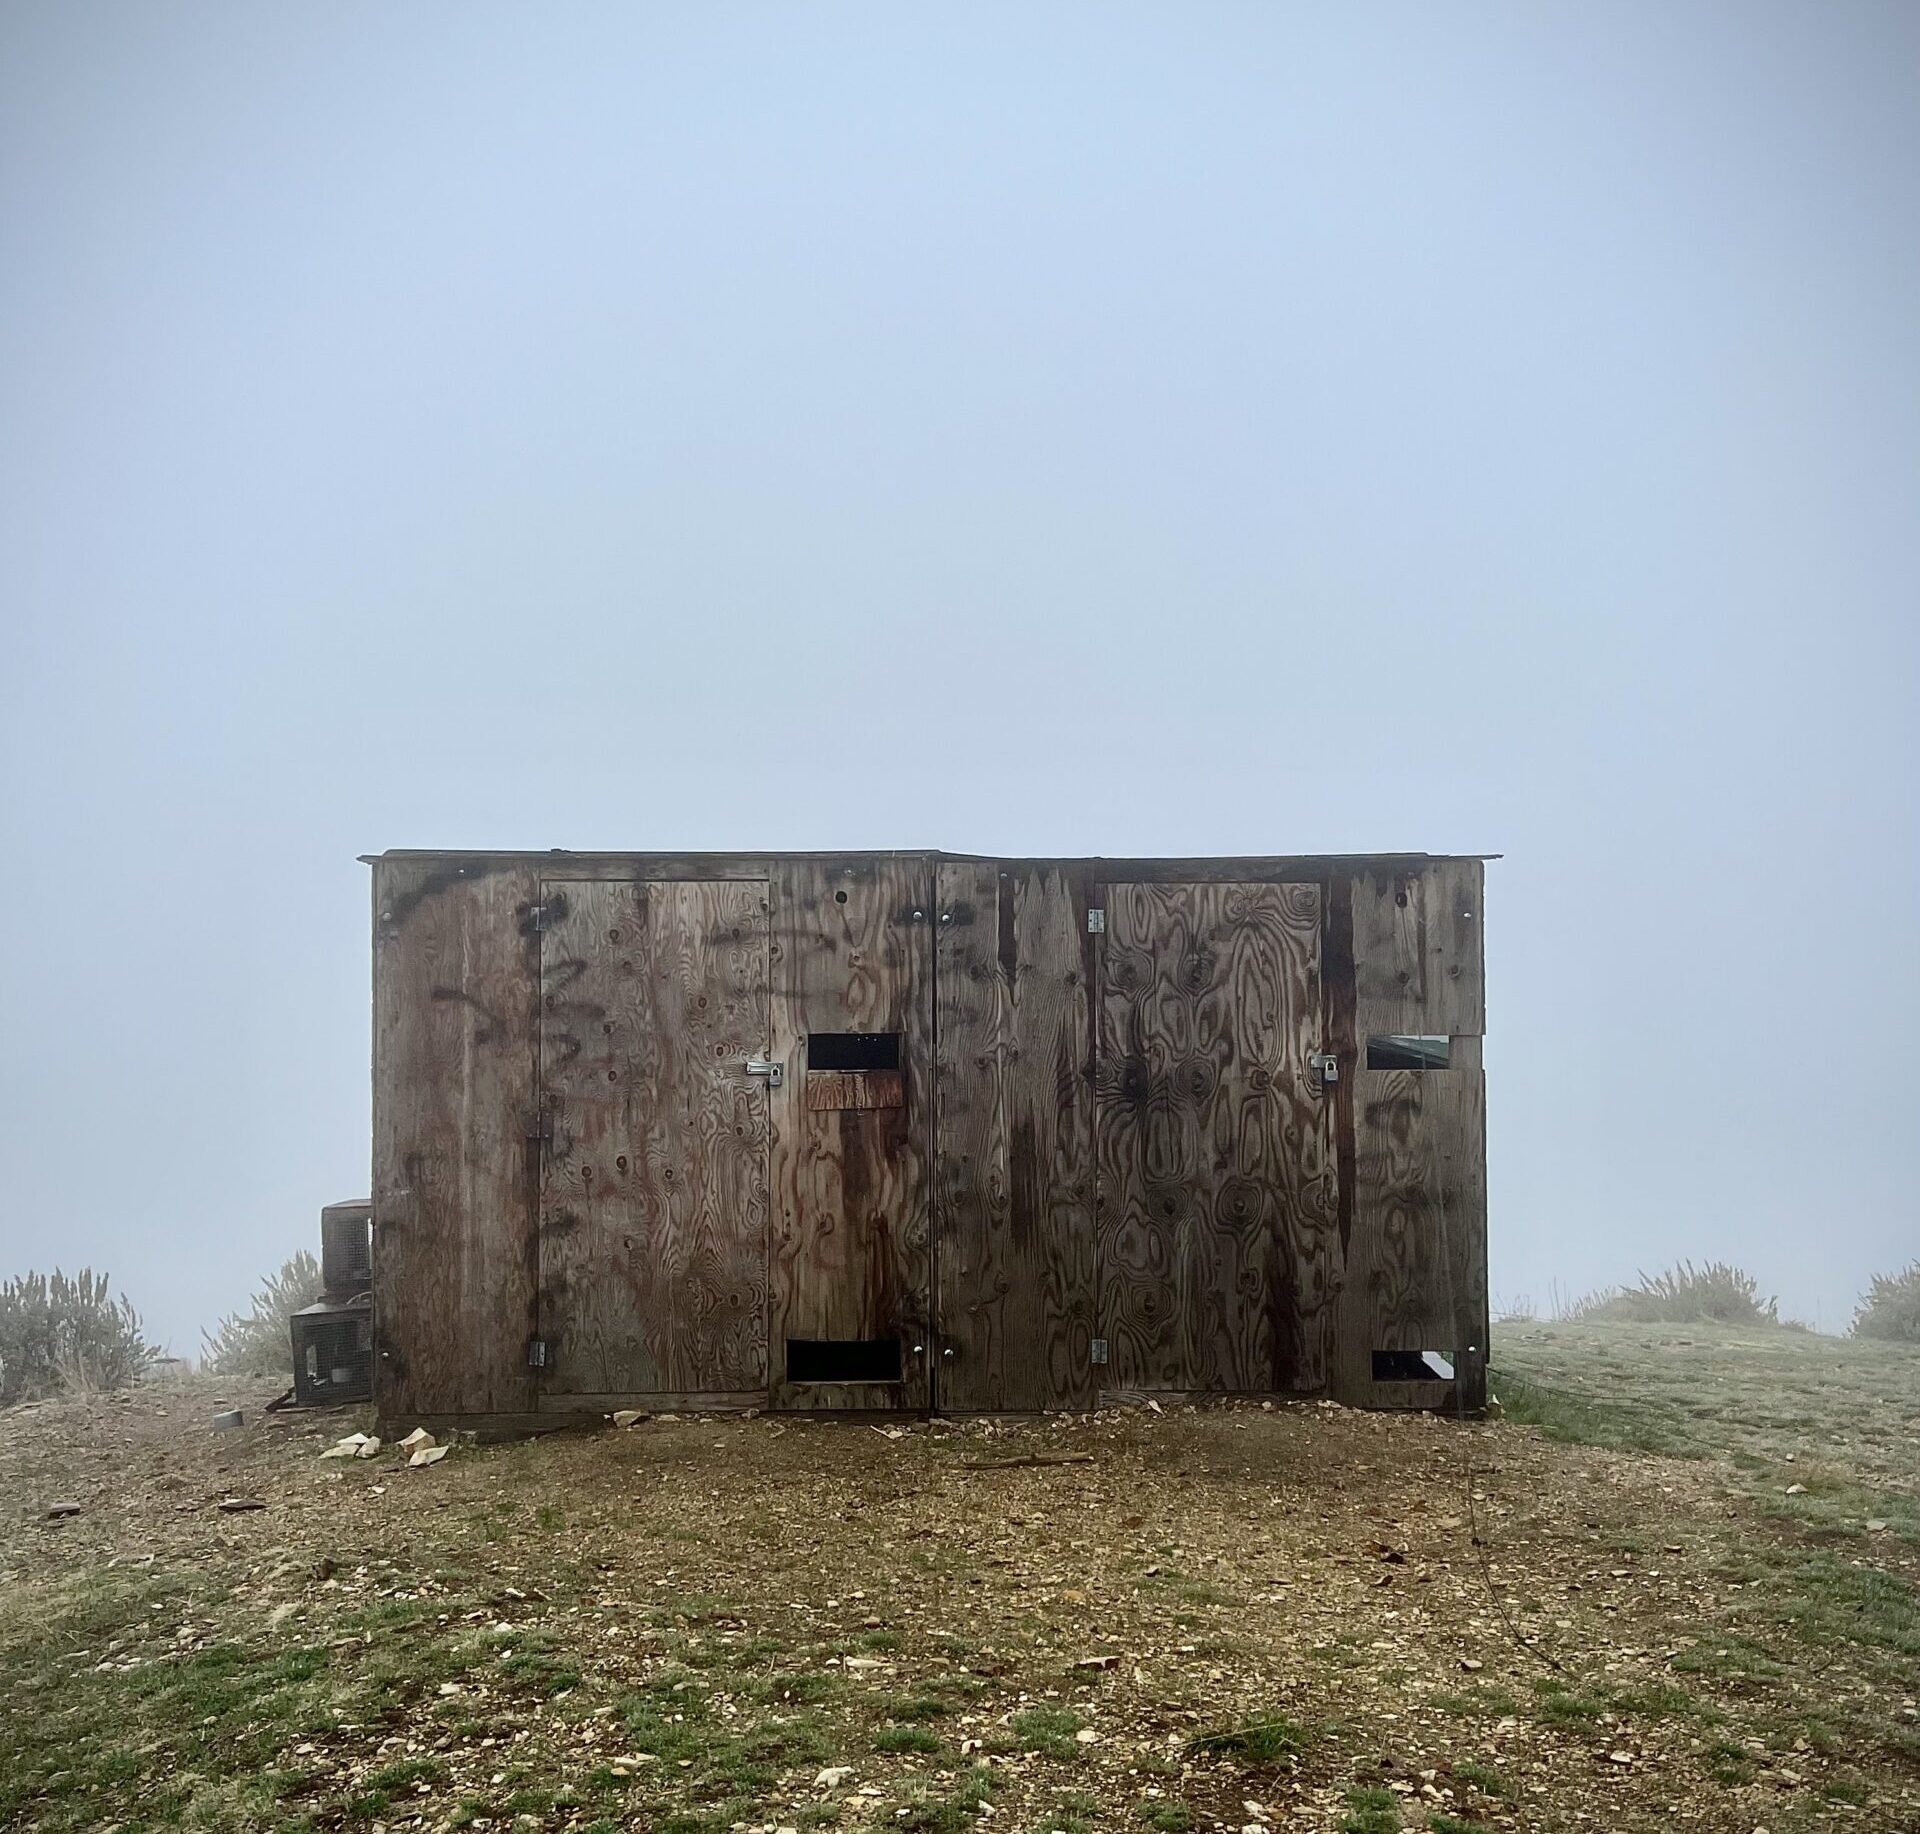 in the foreground is the wooden trapping blind (like a small plywood box) sitting on a gravely hilltop. The surrounding background is completely socked in with fog, with no terrain or features visible